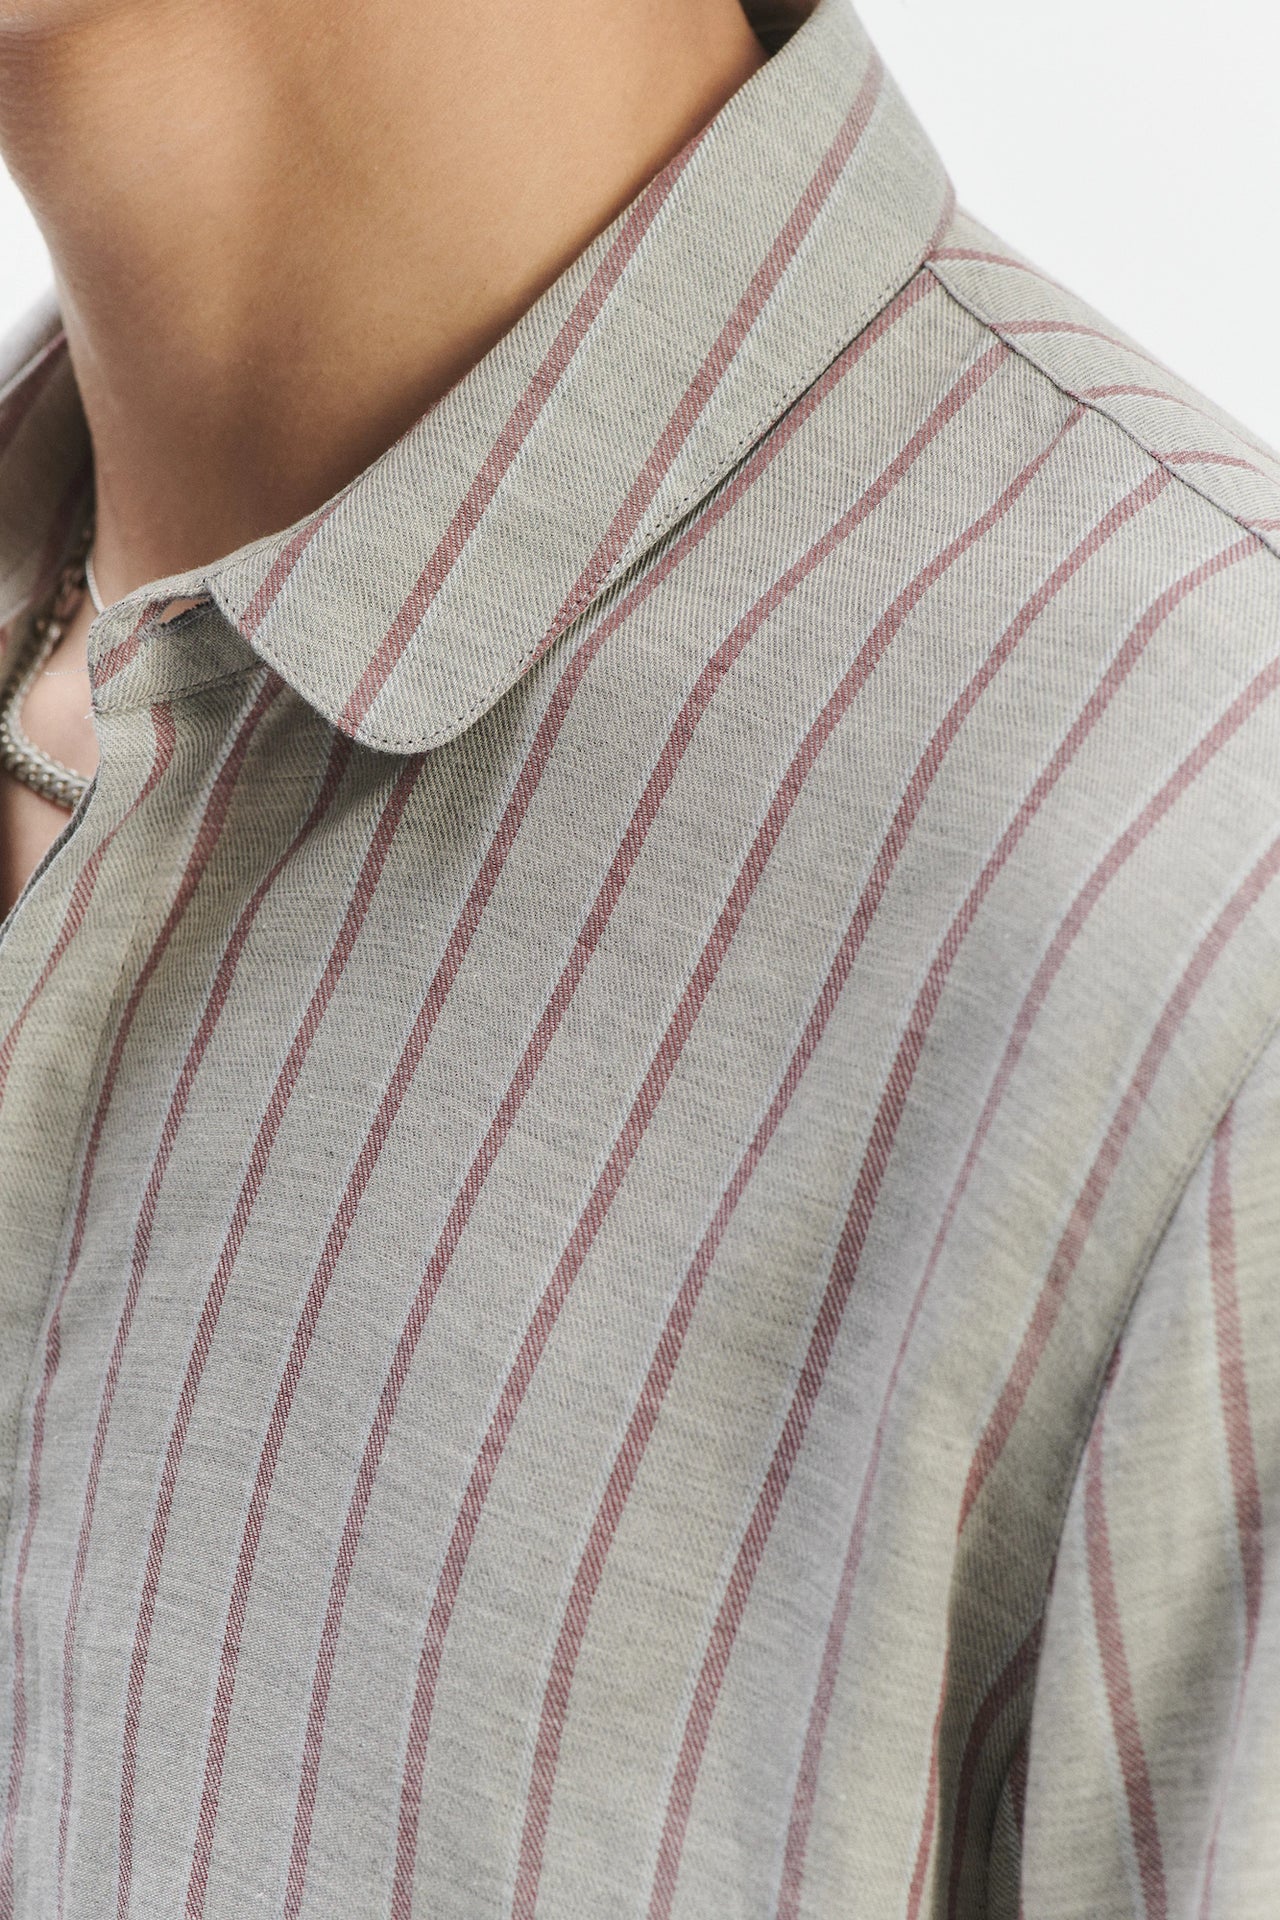 Cute Shirt in a Grey and Wine Red Striped Blend of Portuguese Cotton and Cashmere